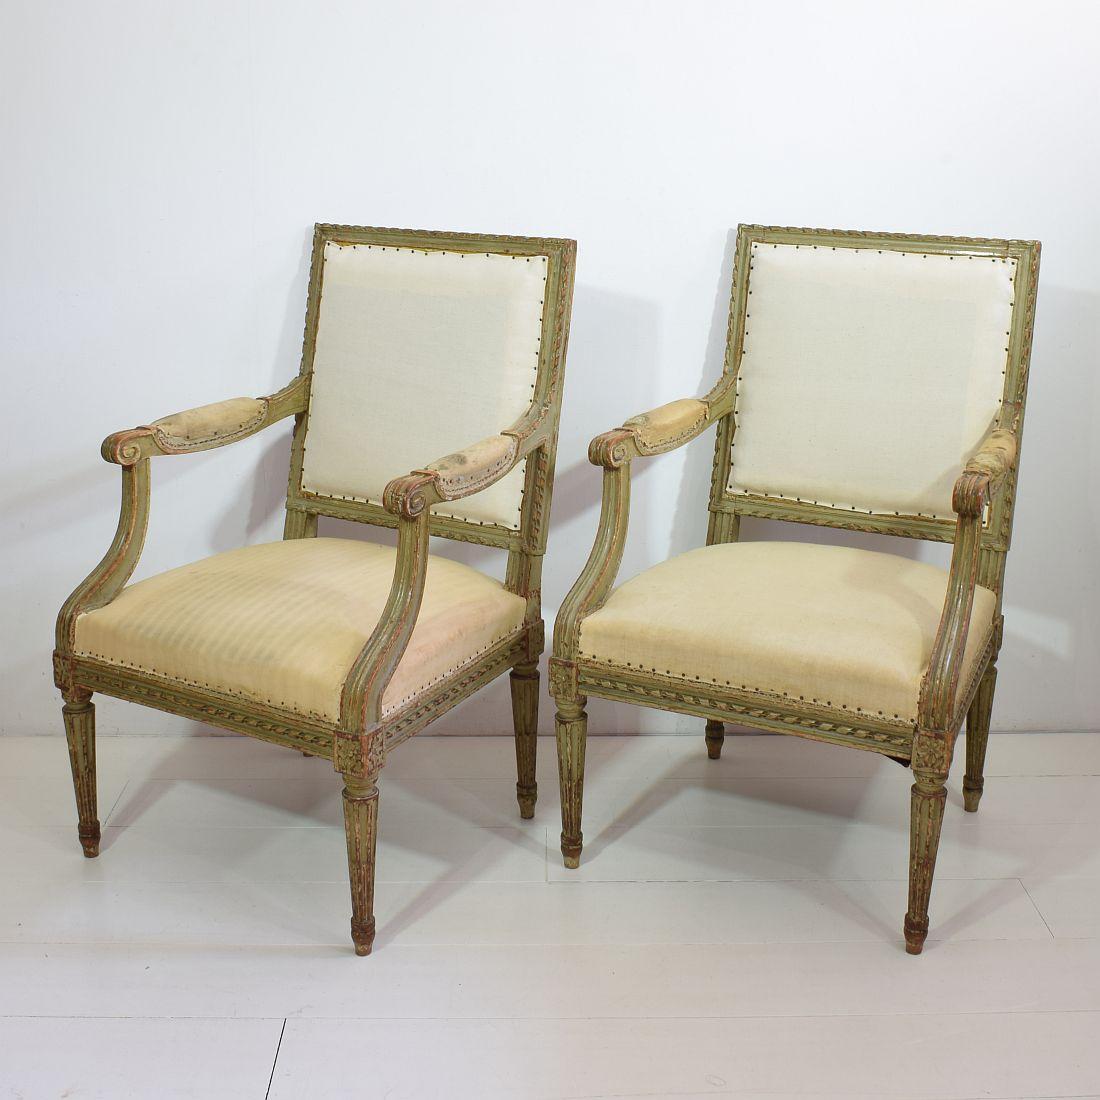 Beautiful pair of Louis XVI style armchairs, France 19th century, in beautiful weathered but structural good condition. They need new lining. 
Measure: Seat height is 42 cm. More pictures available on request.